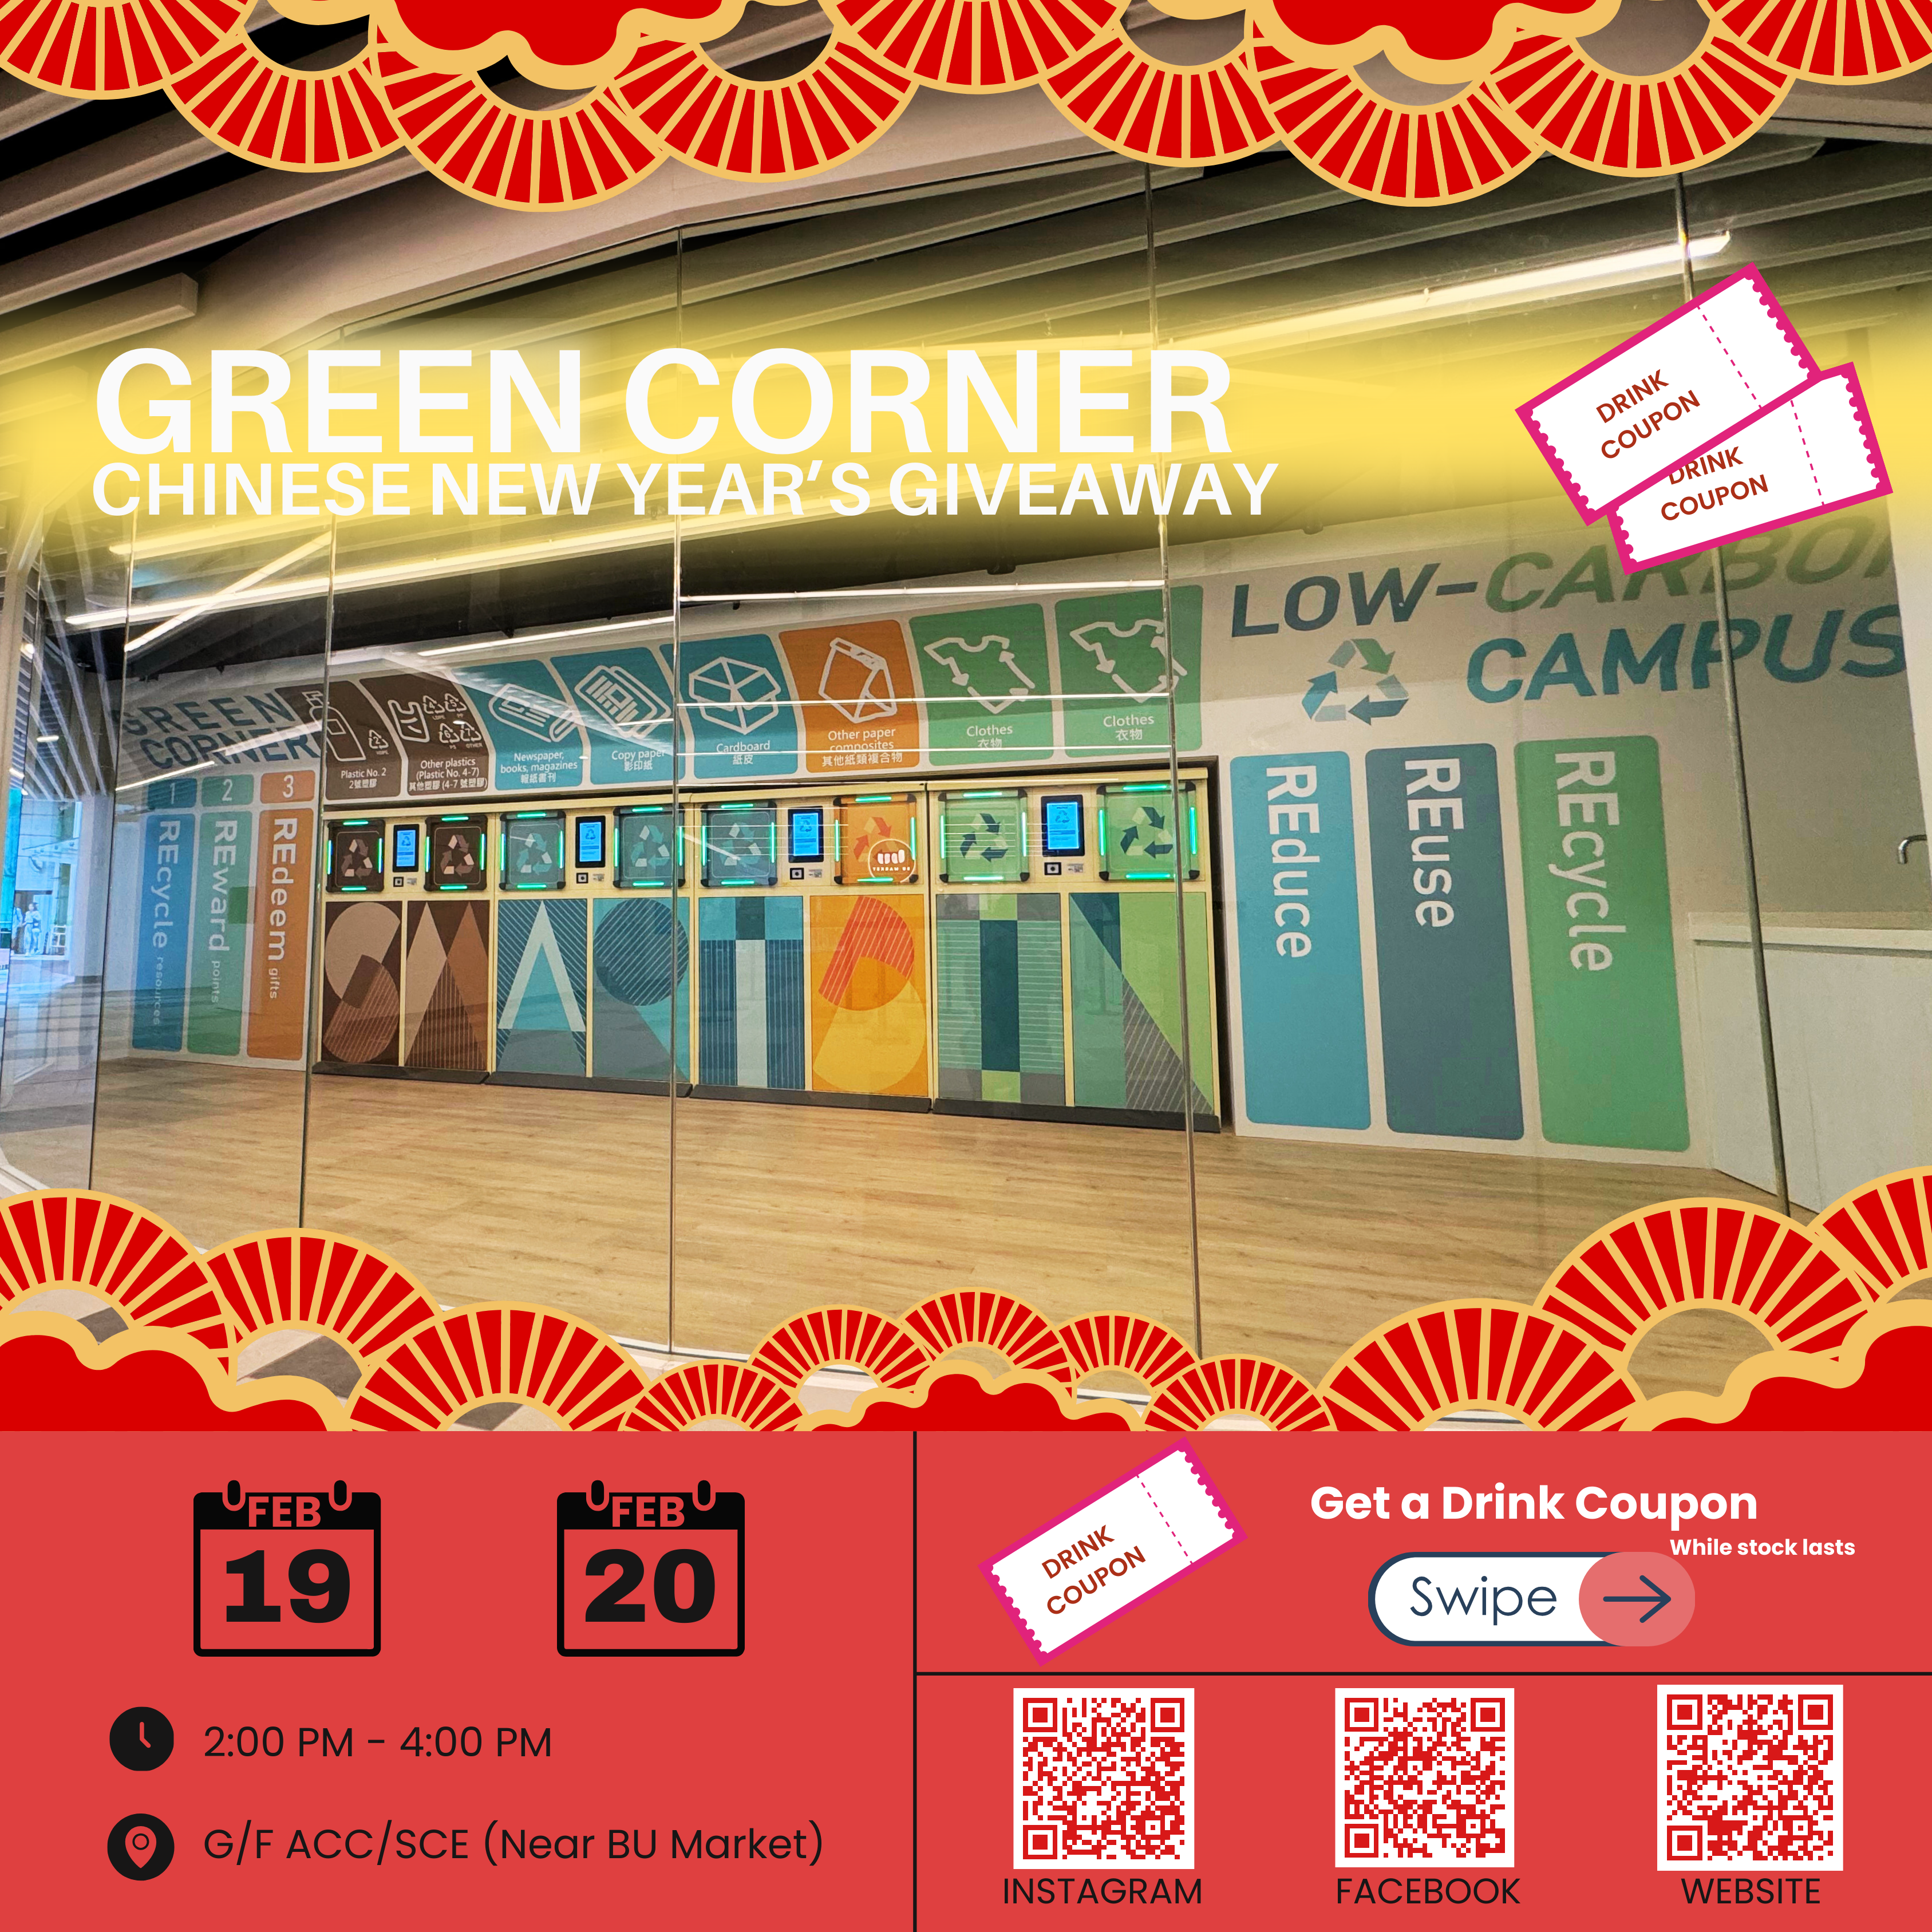 Green Corner Chinese New Year's Giveaway